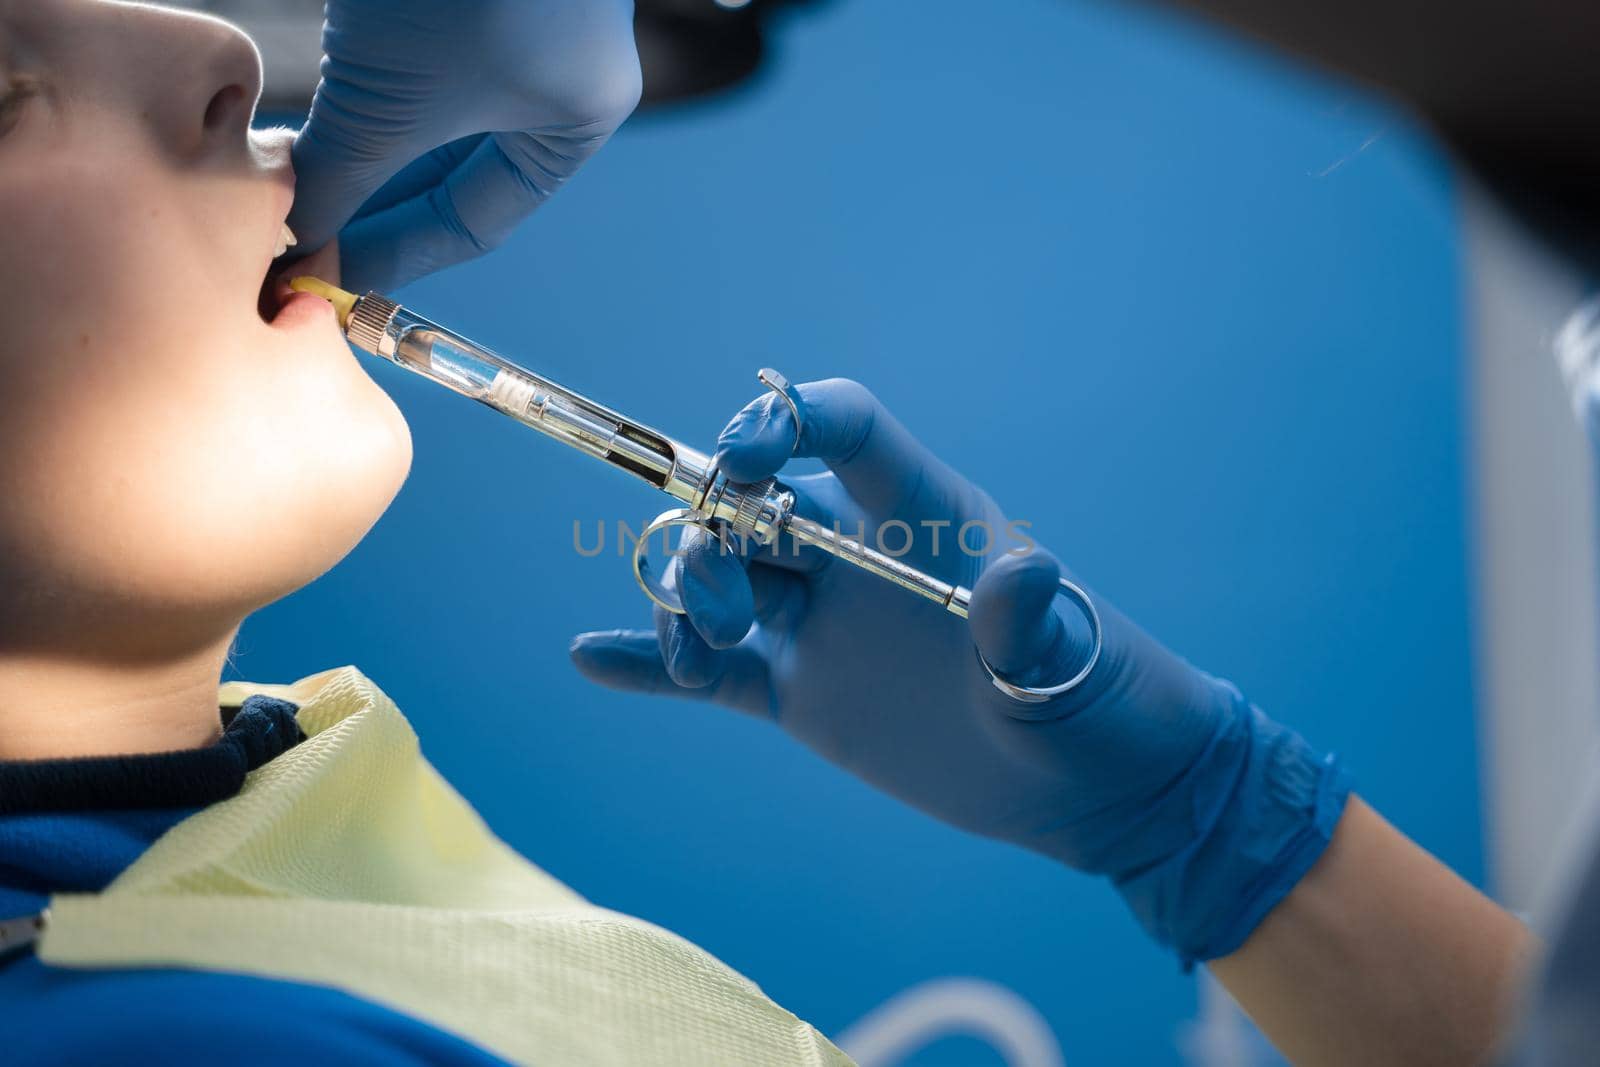 Dentist injects anesthesia syringe of the diseased teeth for the patient. Caries treatment